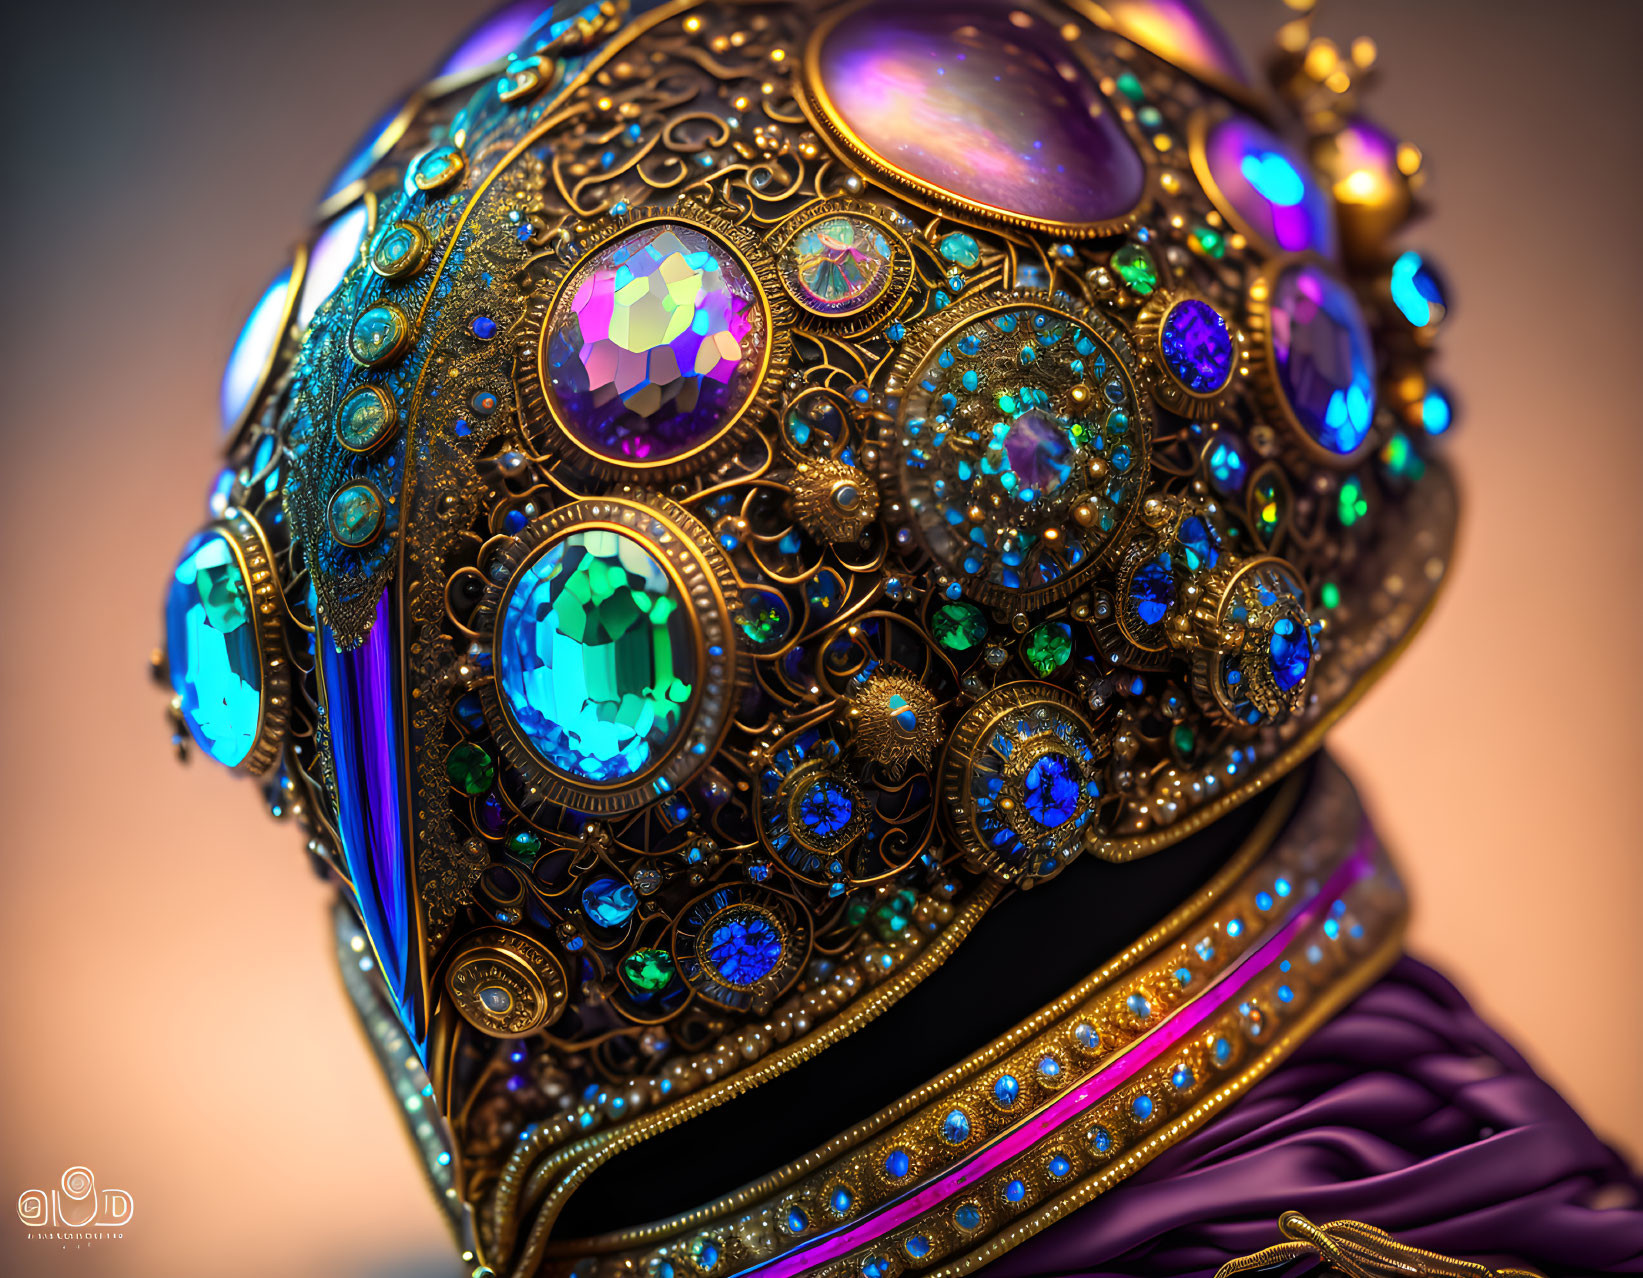 Golden Helmet with Colorful Gemstones and Intricate Designs